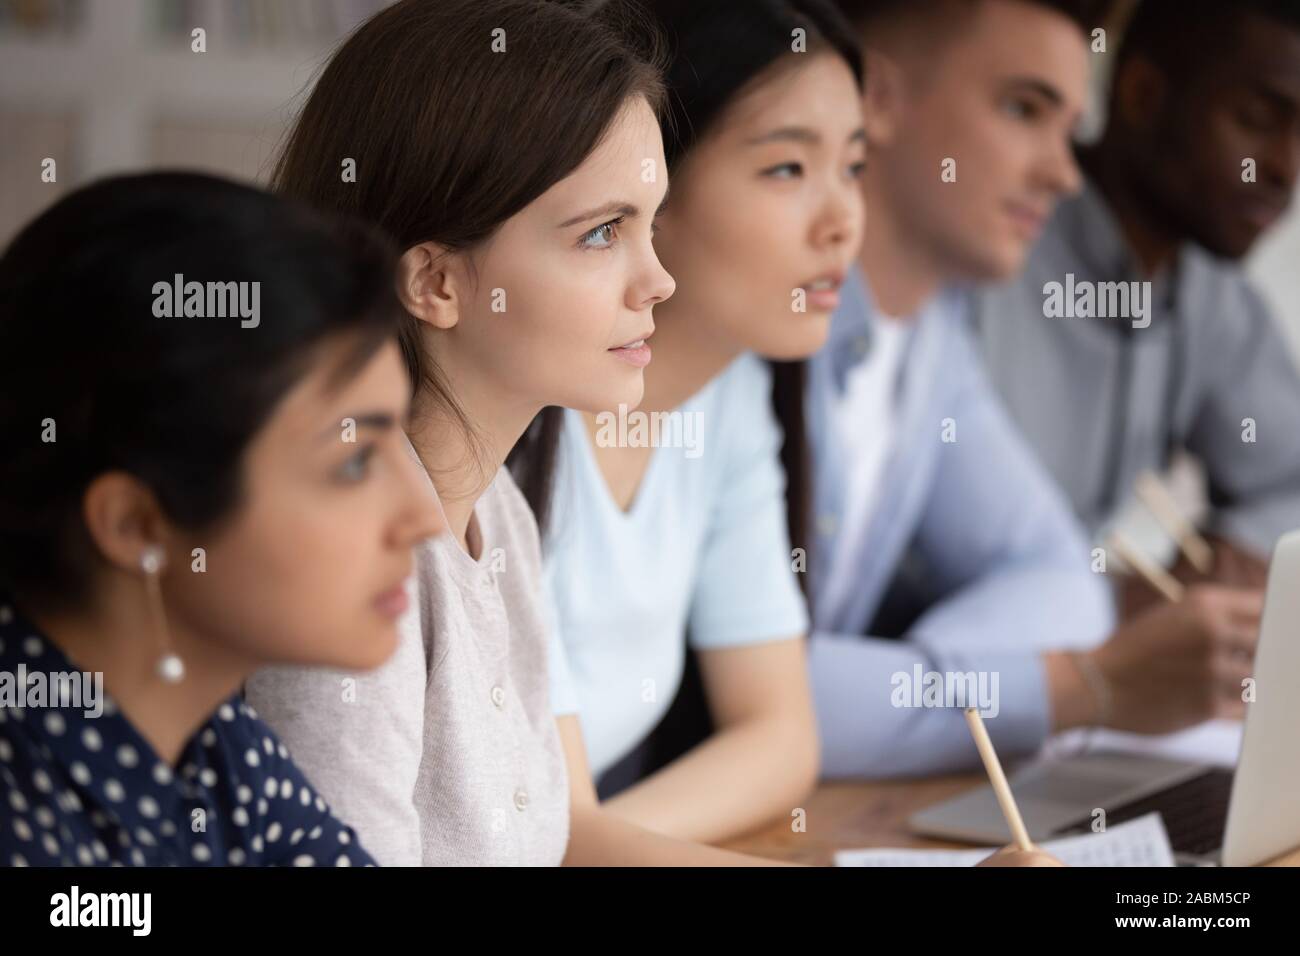 Focused group of mixed race students sitting together at lecture. Stock Photo